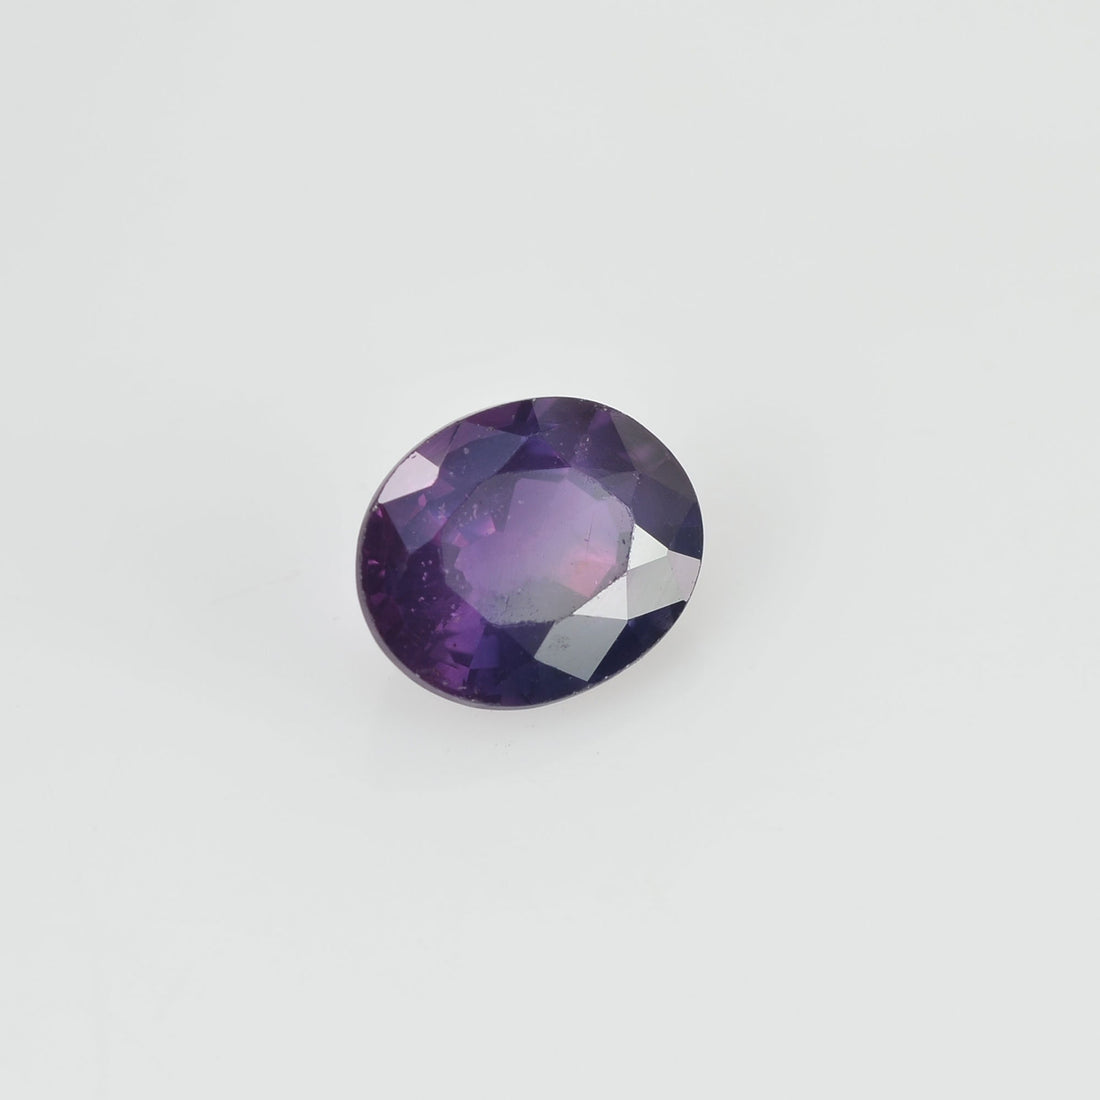 0.85 cts Natural Purple Sapphire Loose Gemstone Oval Cut